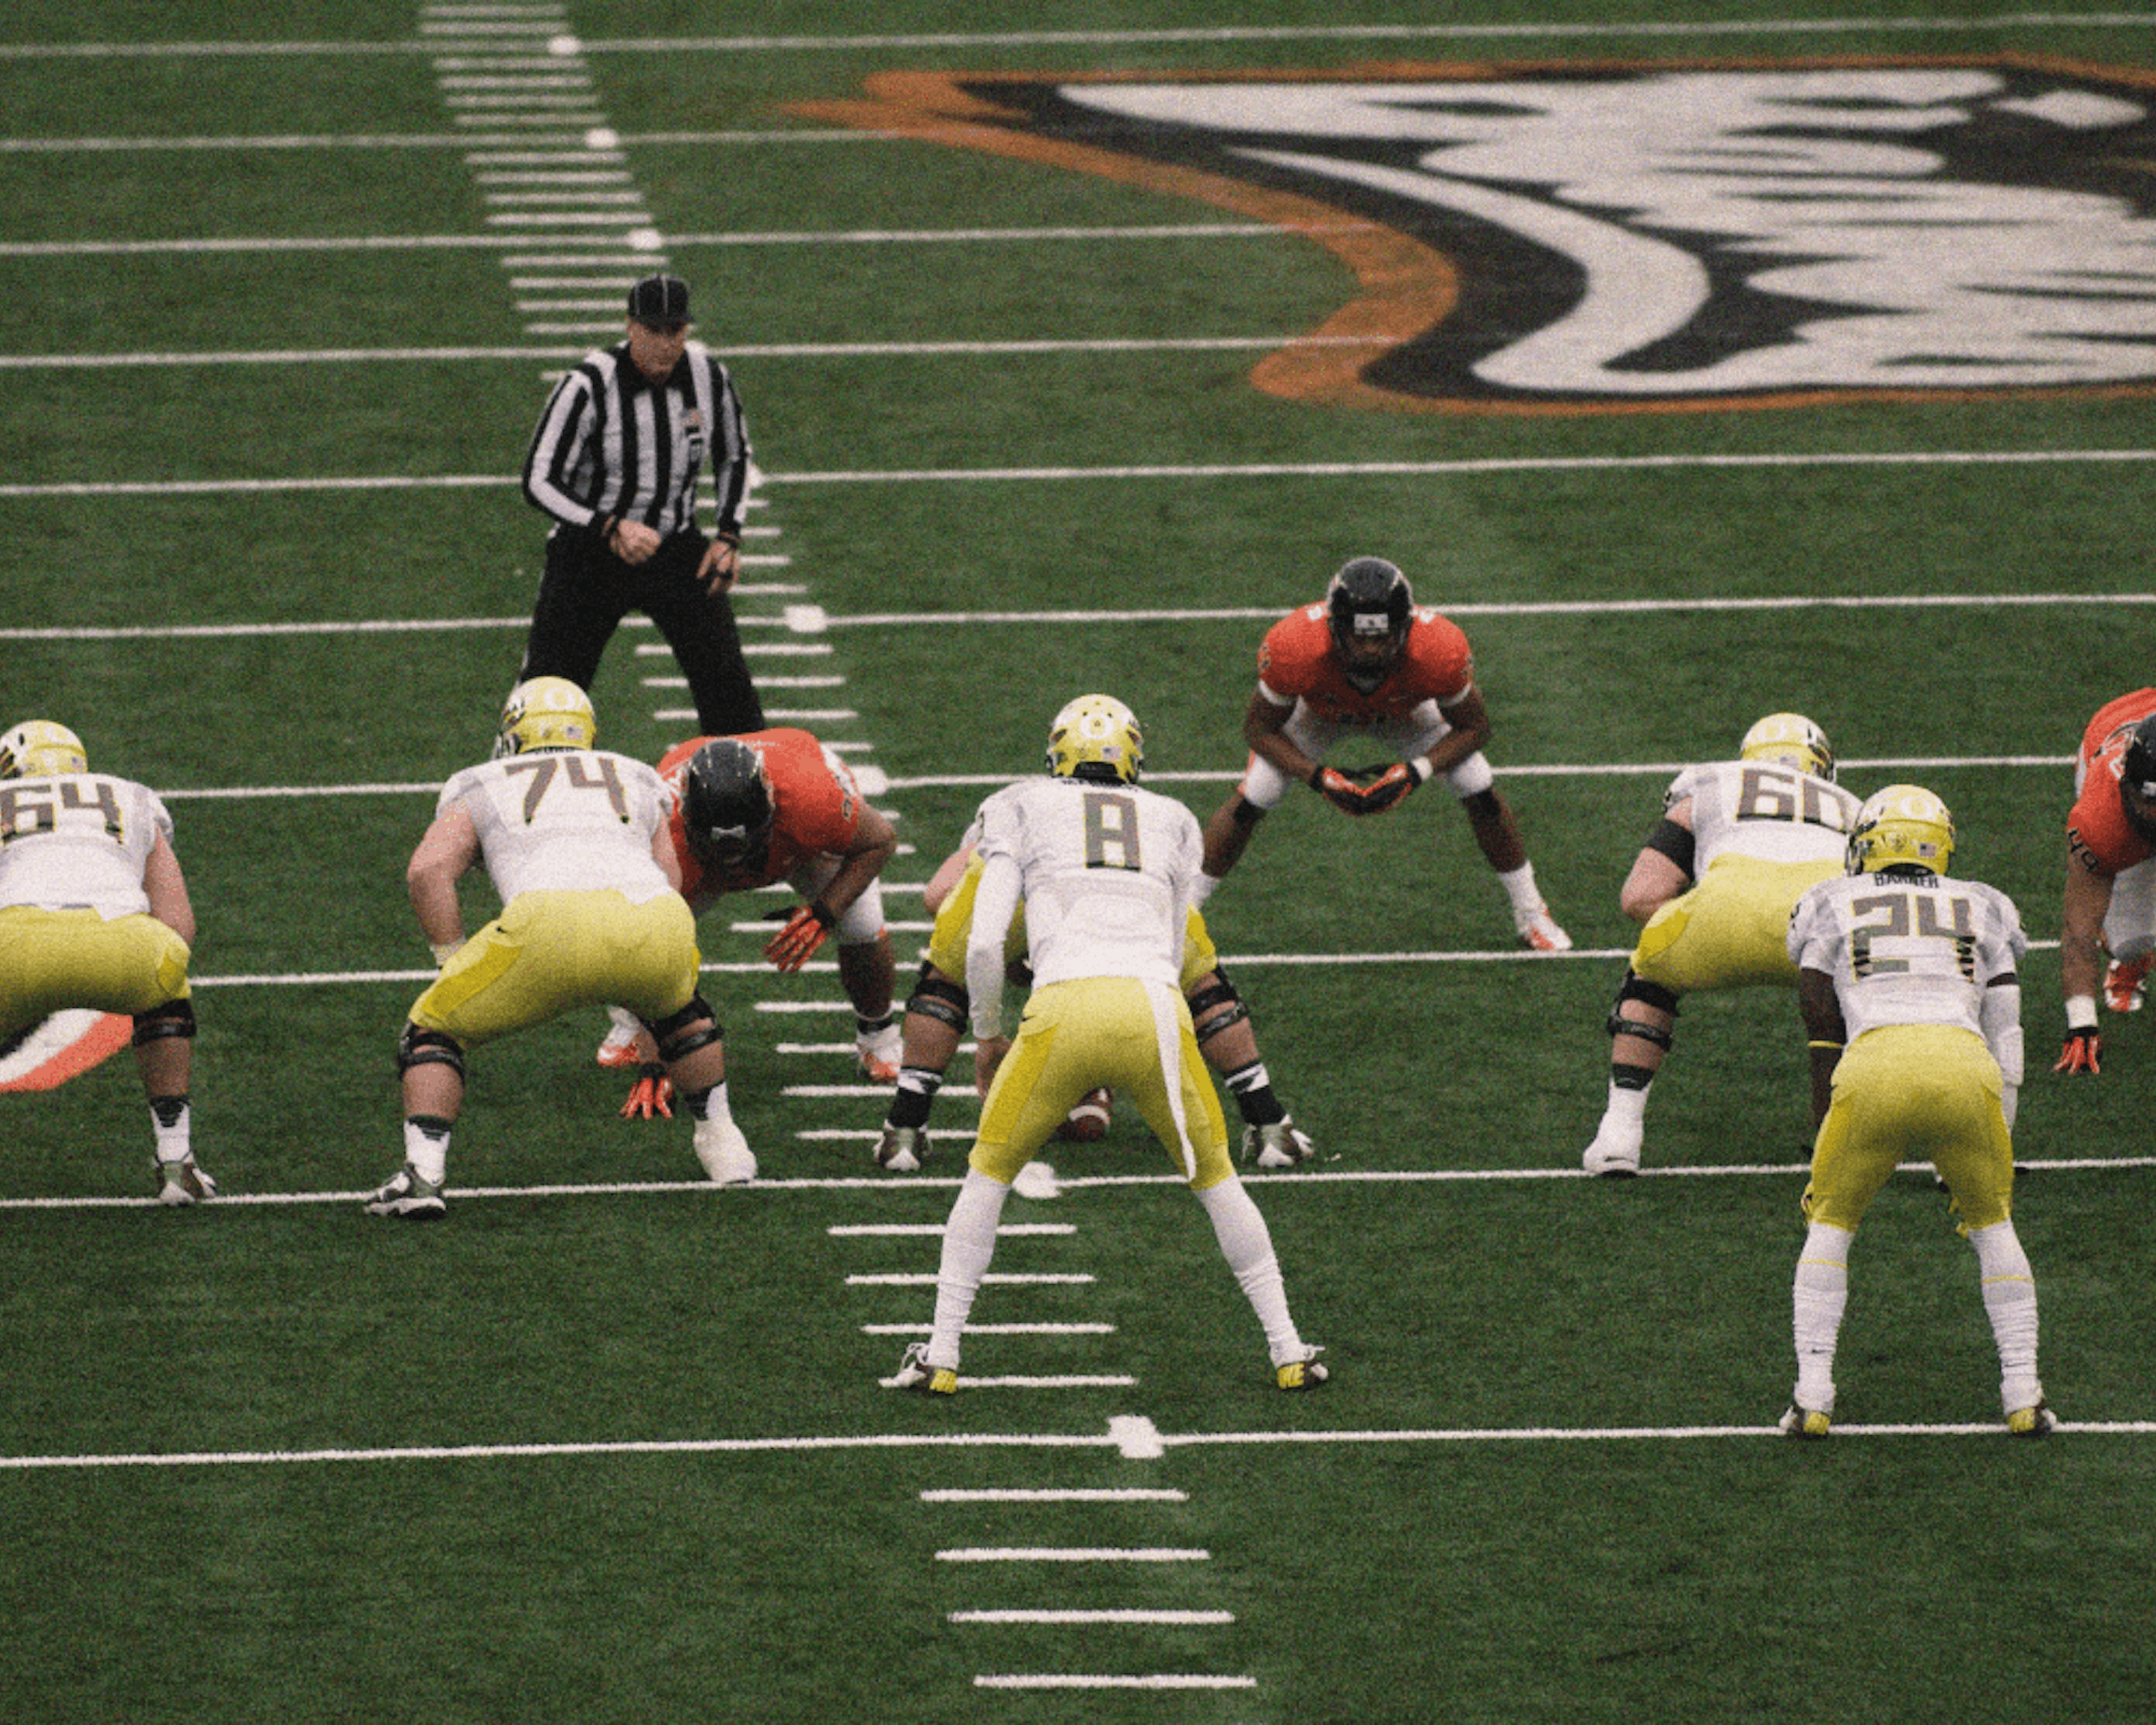 University of Oregon football team in action. Credit: Flickr Account osubeaver2000 (modifications made)